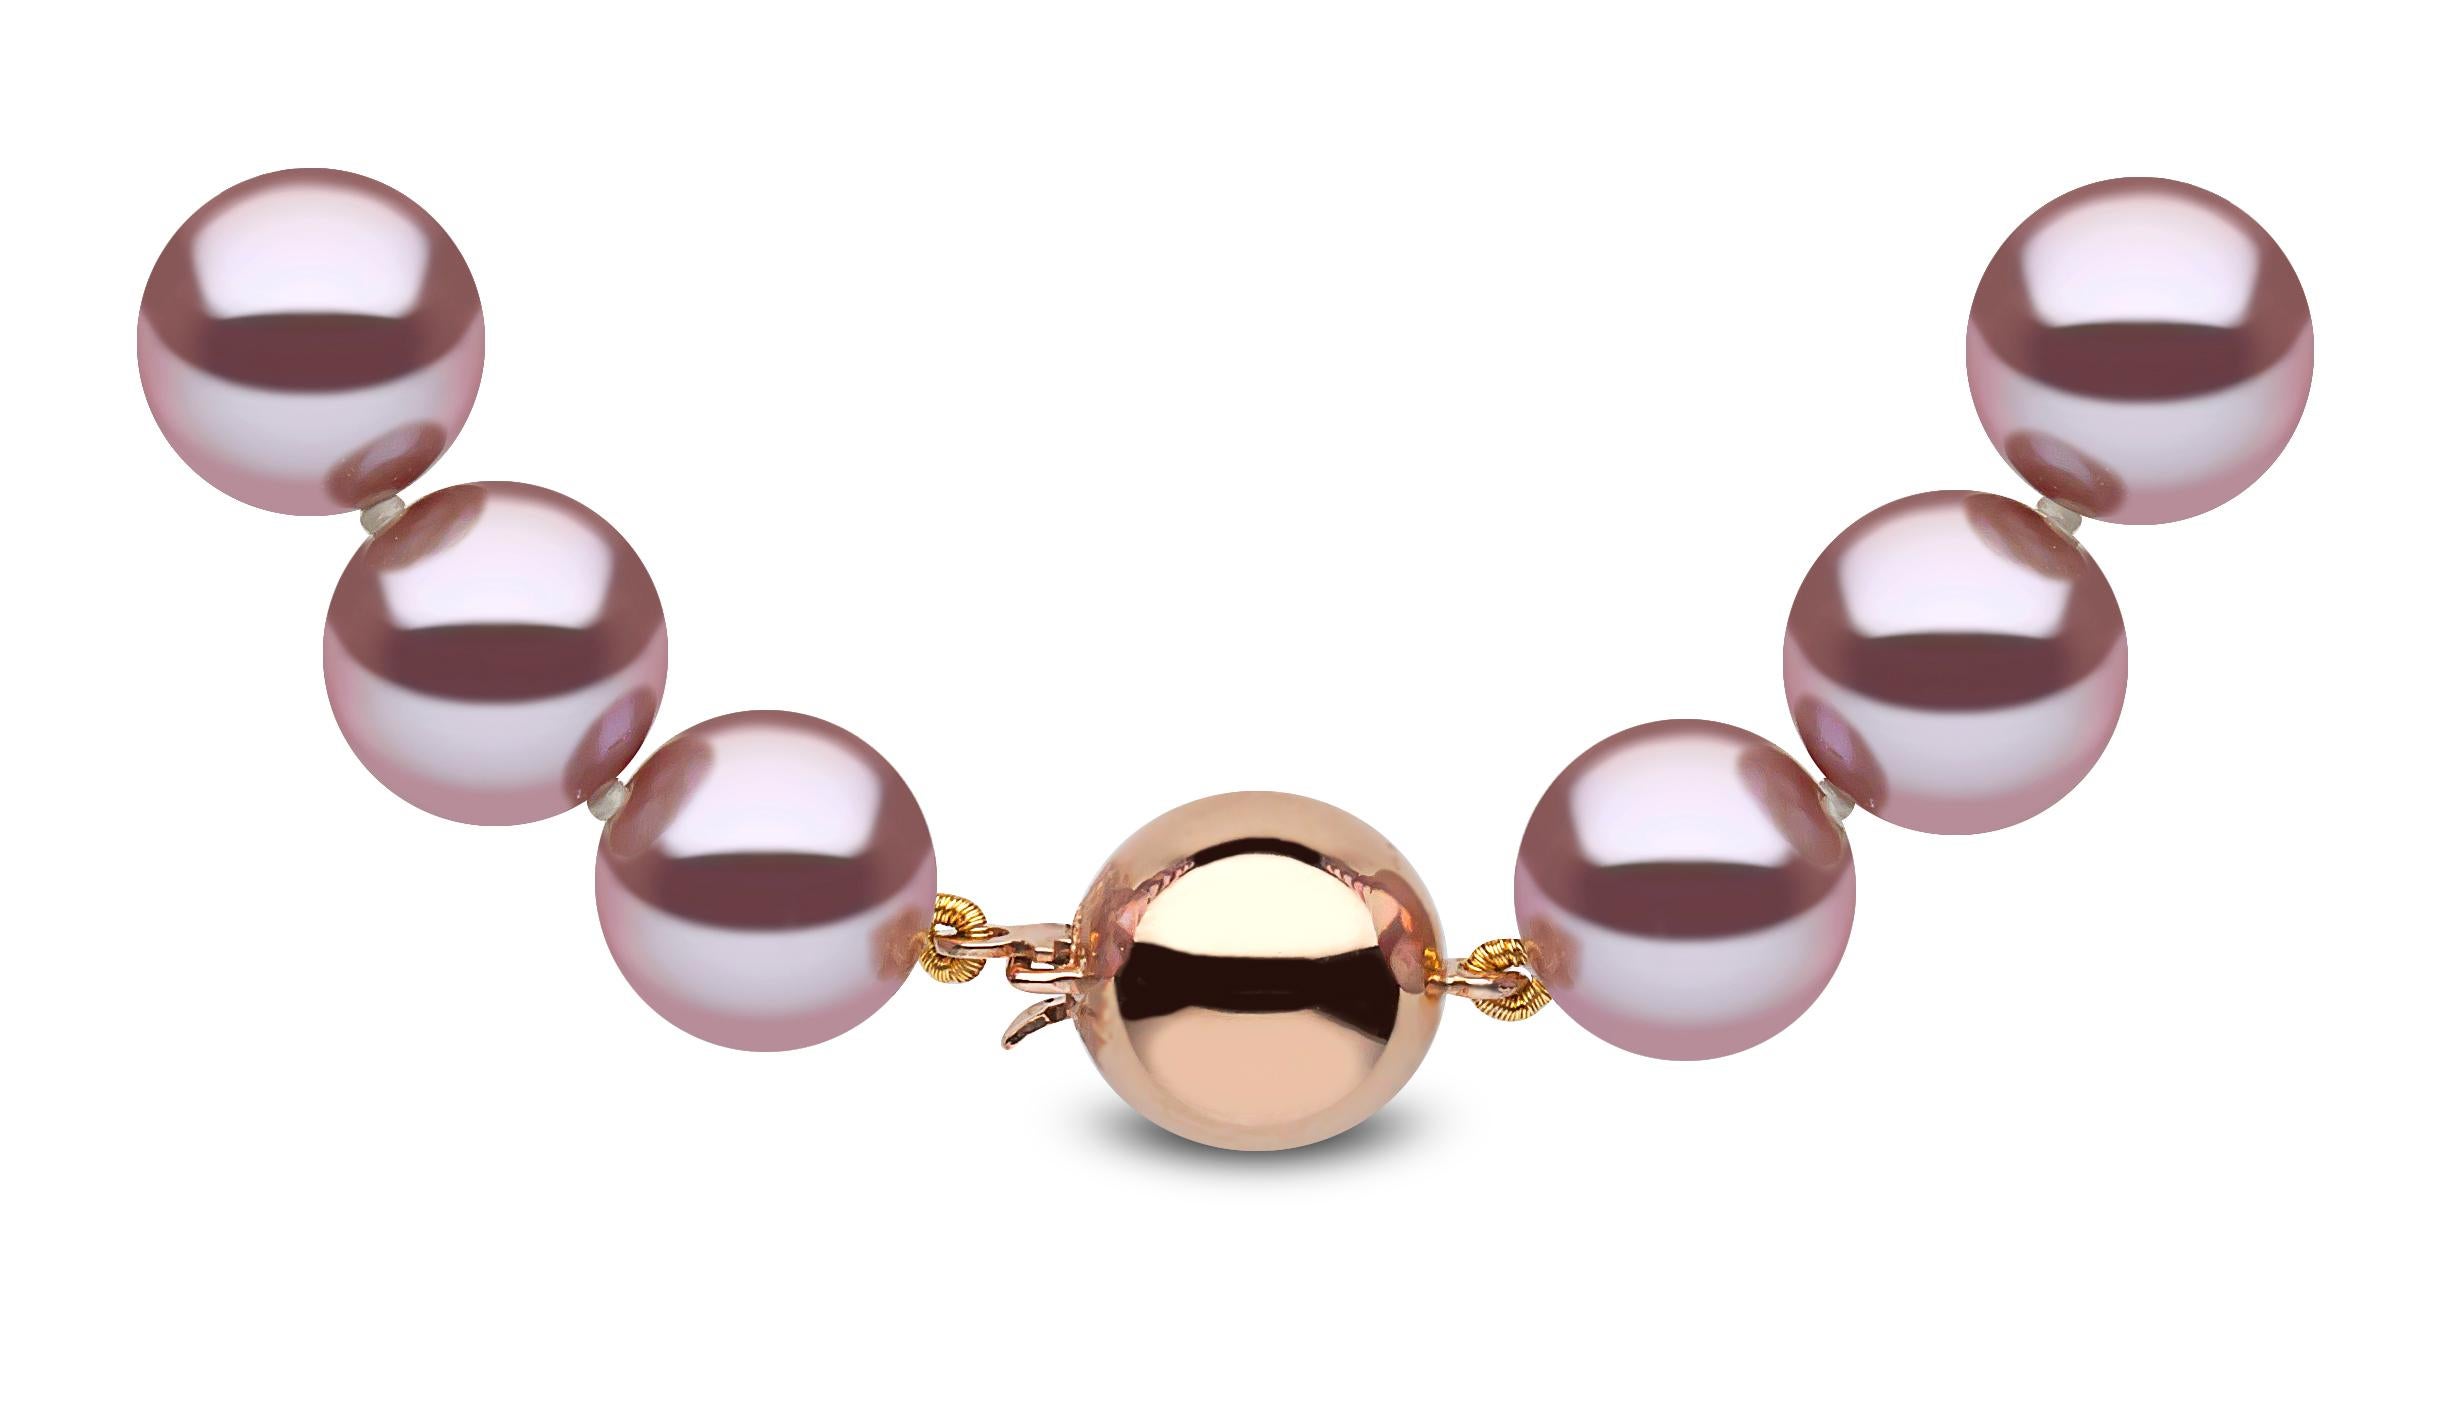 Rare and unique, this necklace by Yoko London features natural pink coloured Freshwater pearls classically strung onto a rose gold clasp. A vibrant yet classic piece, this necklace is sure to add a splash of colour to any outfit it is combined